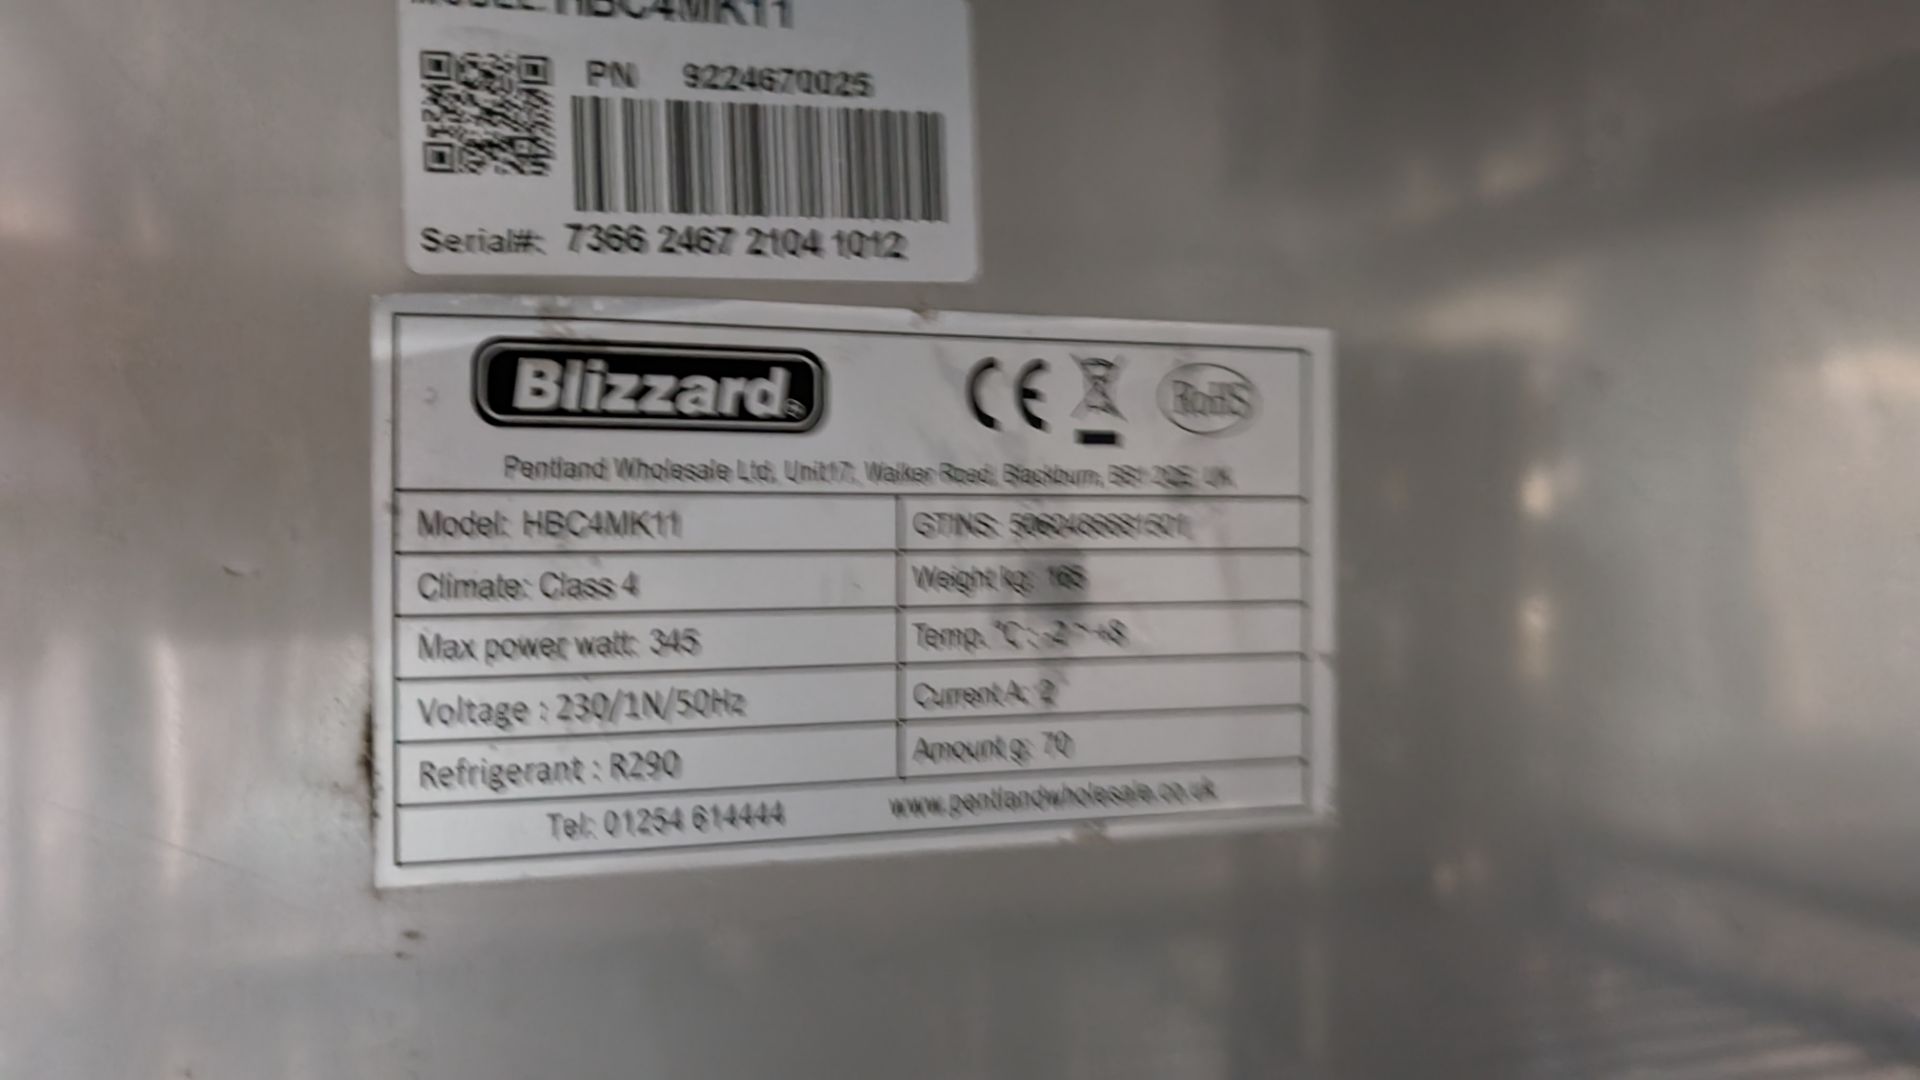 Blizzard stainless steel 4-door refrigerated prep cabinet - Image 6 of 7